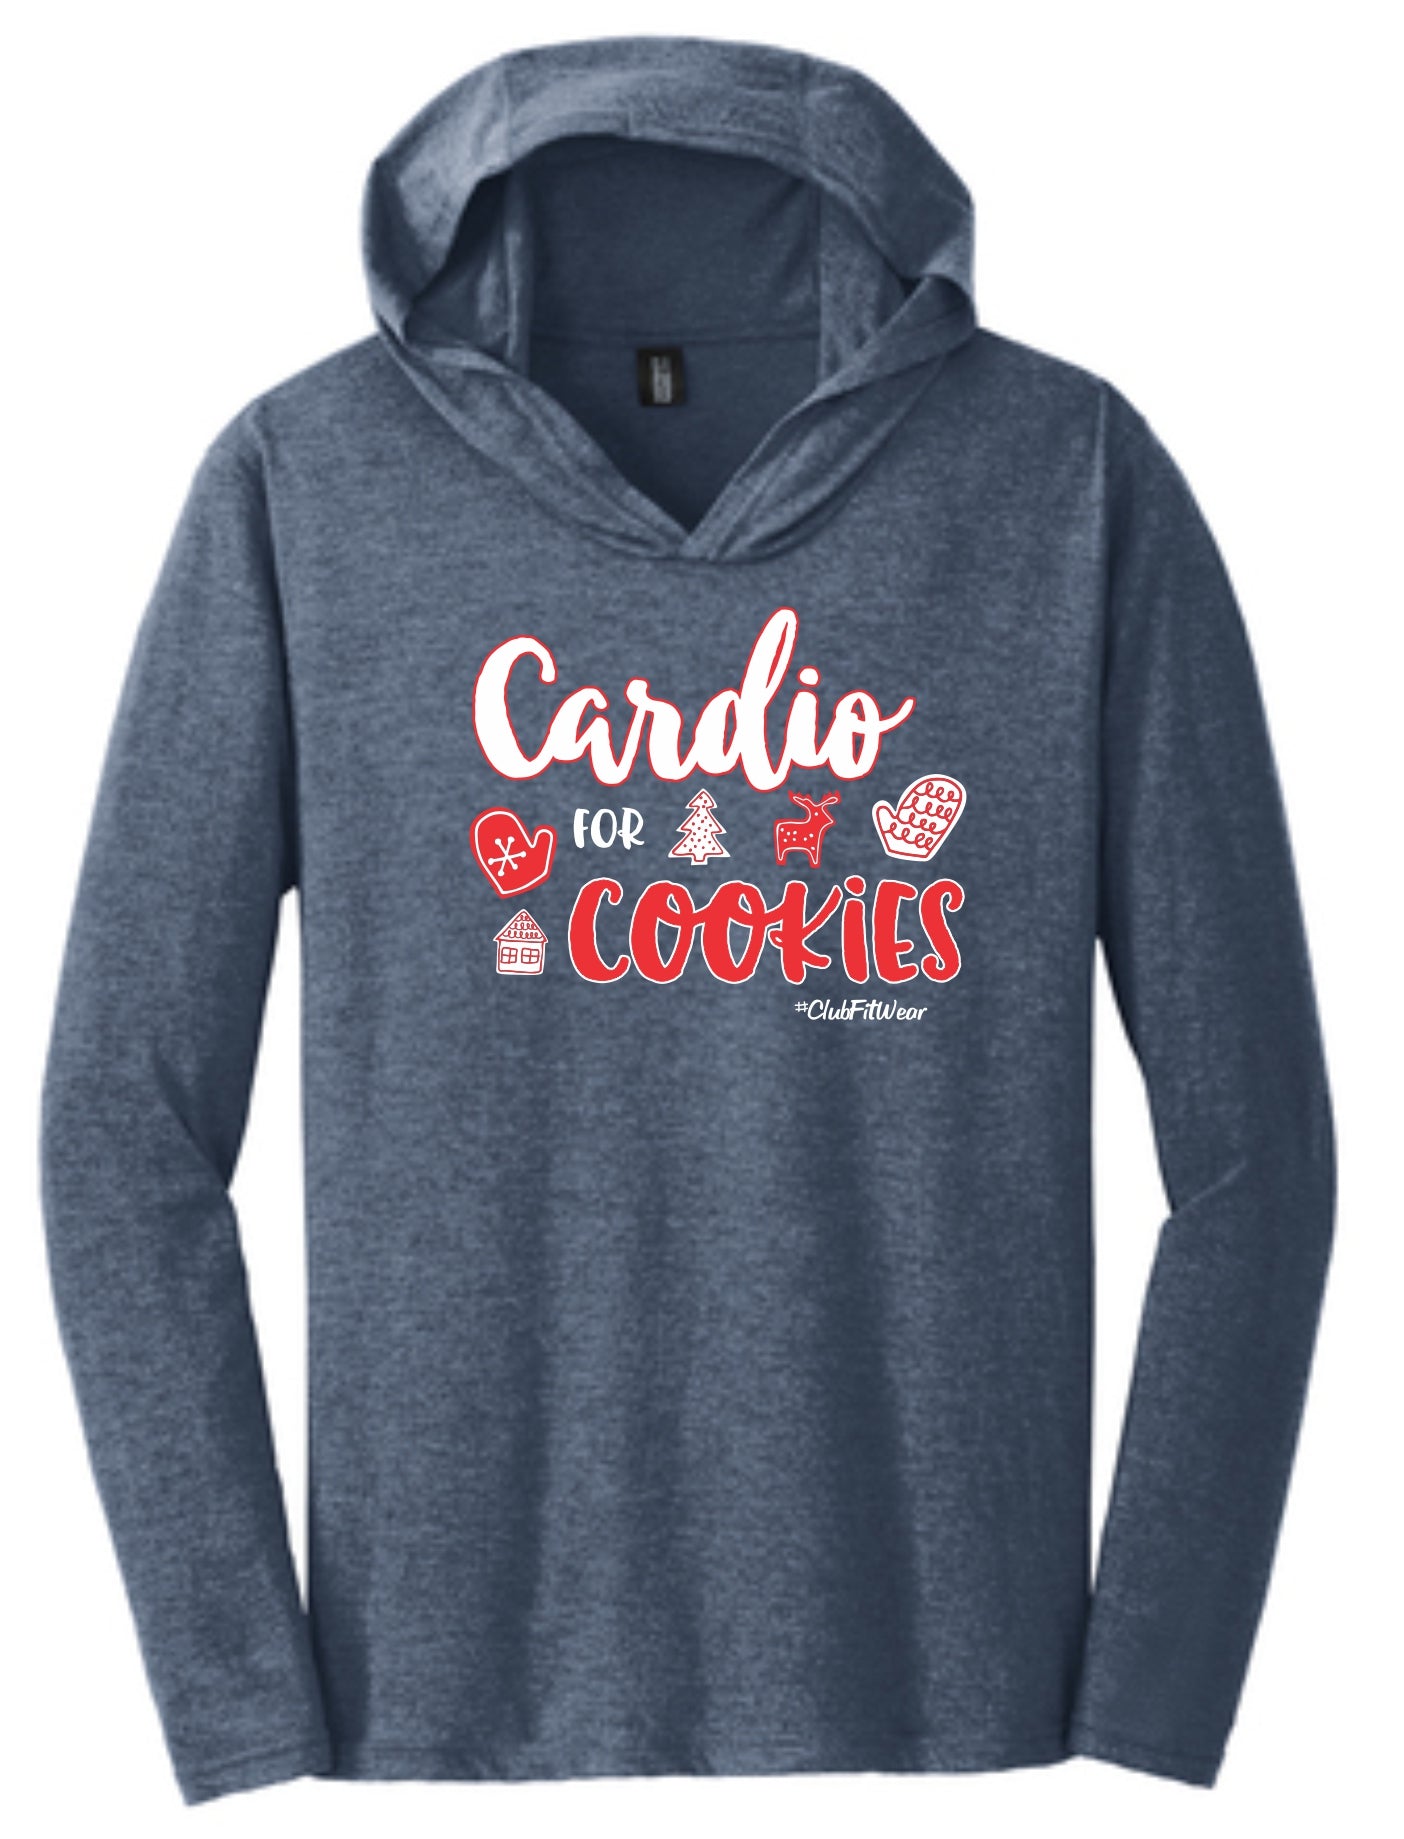 Cardio for Cookies - Hooded Pullover